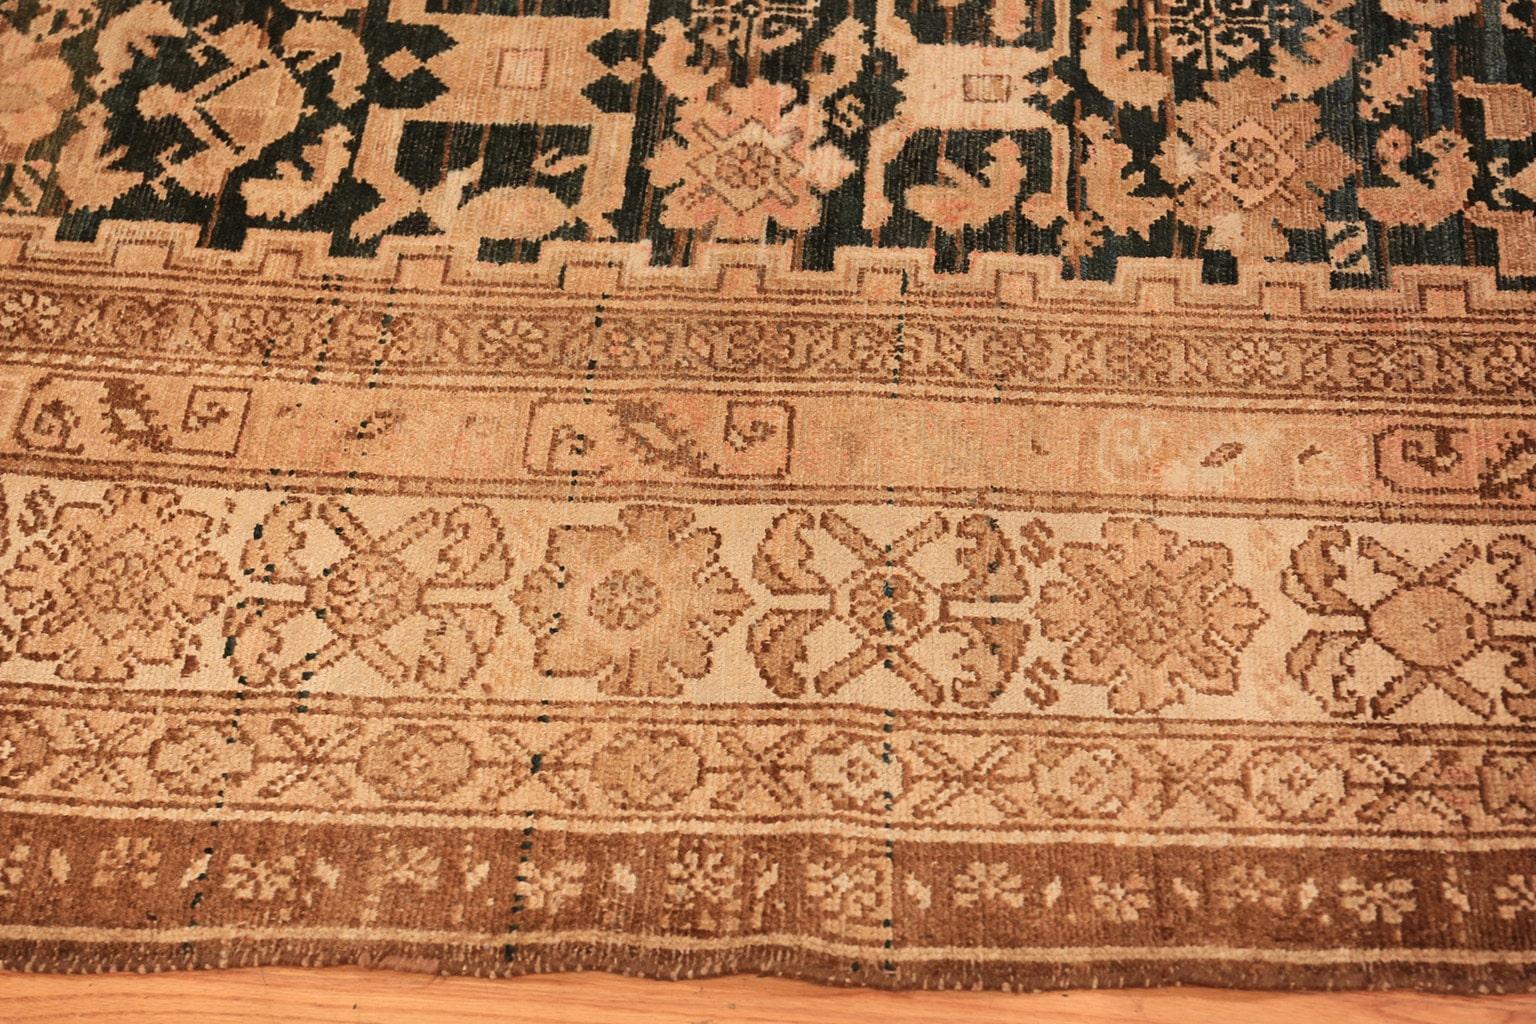 Tribal gallery size antique Persian Malayer rug, country of origin: Persia, date circa 1900. Size: 7 ft x 15 ft 7 in (2.13 m x 4.75 m).

This antique Persian rug is a long banner with an almost black central field that draws the eye. Created in the